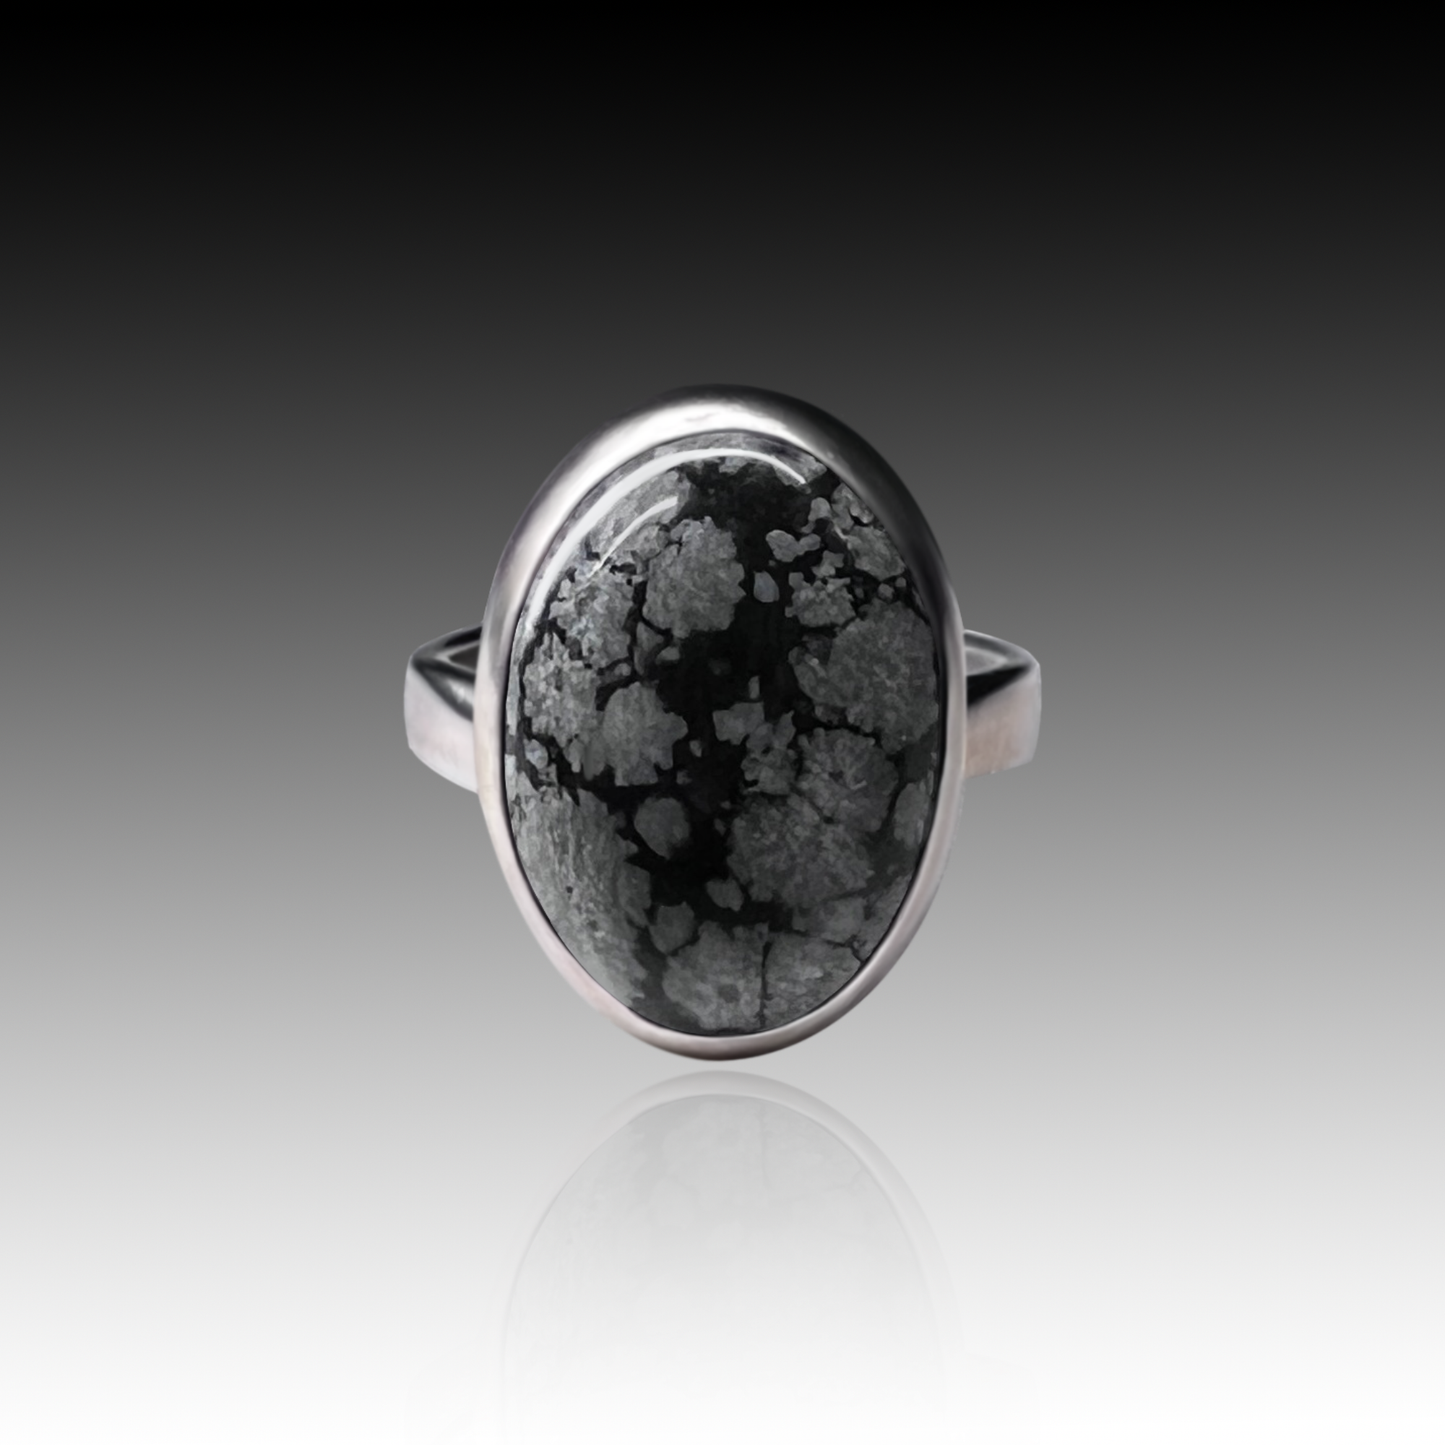 Yas - Snowflake Obsidian Sterling Silver Ring